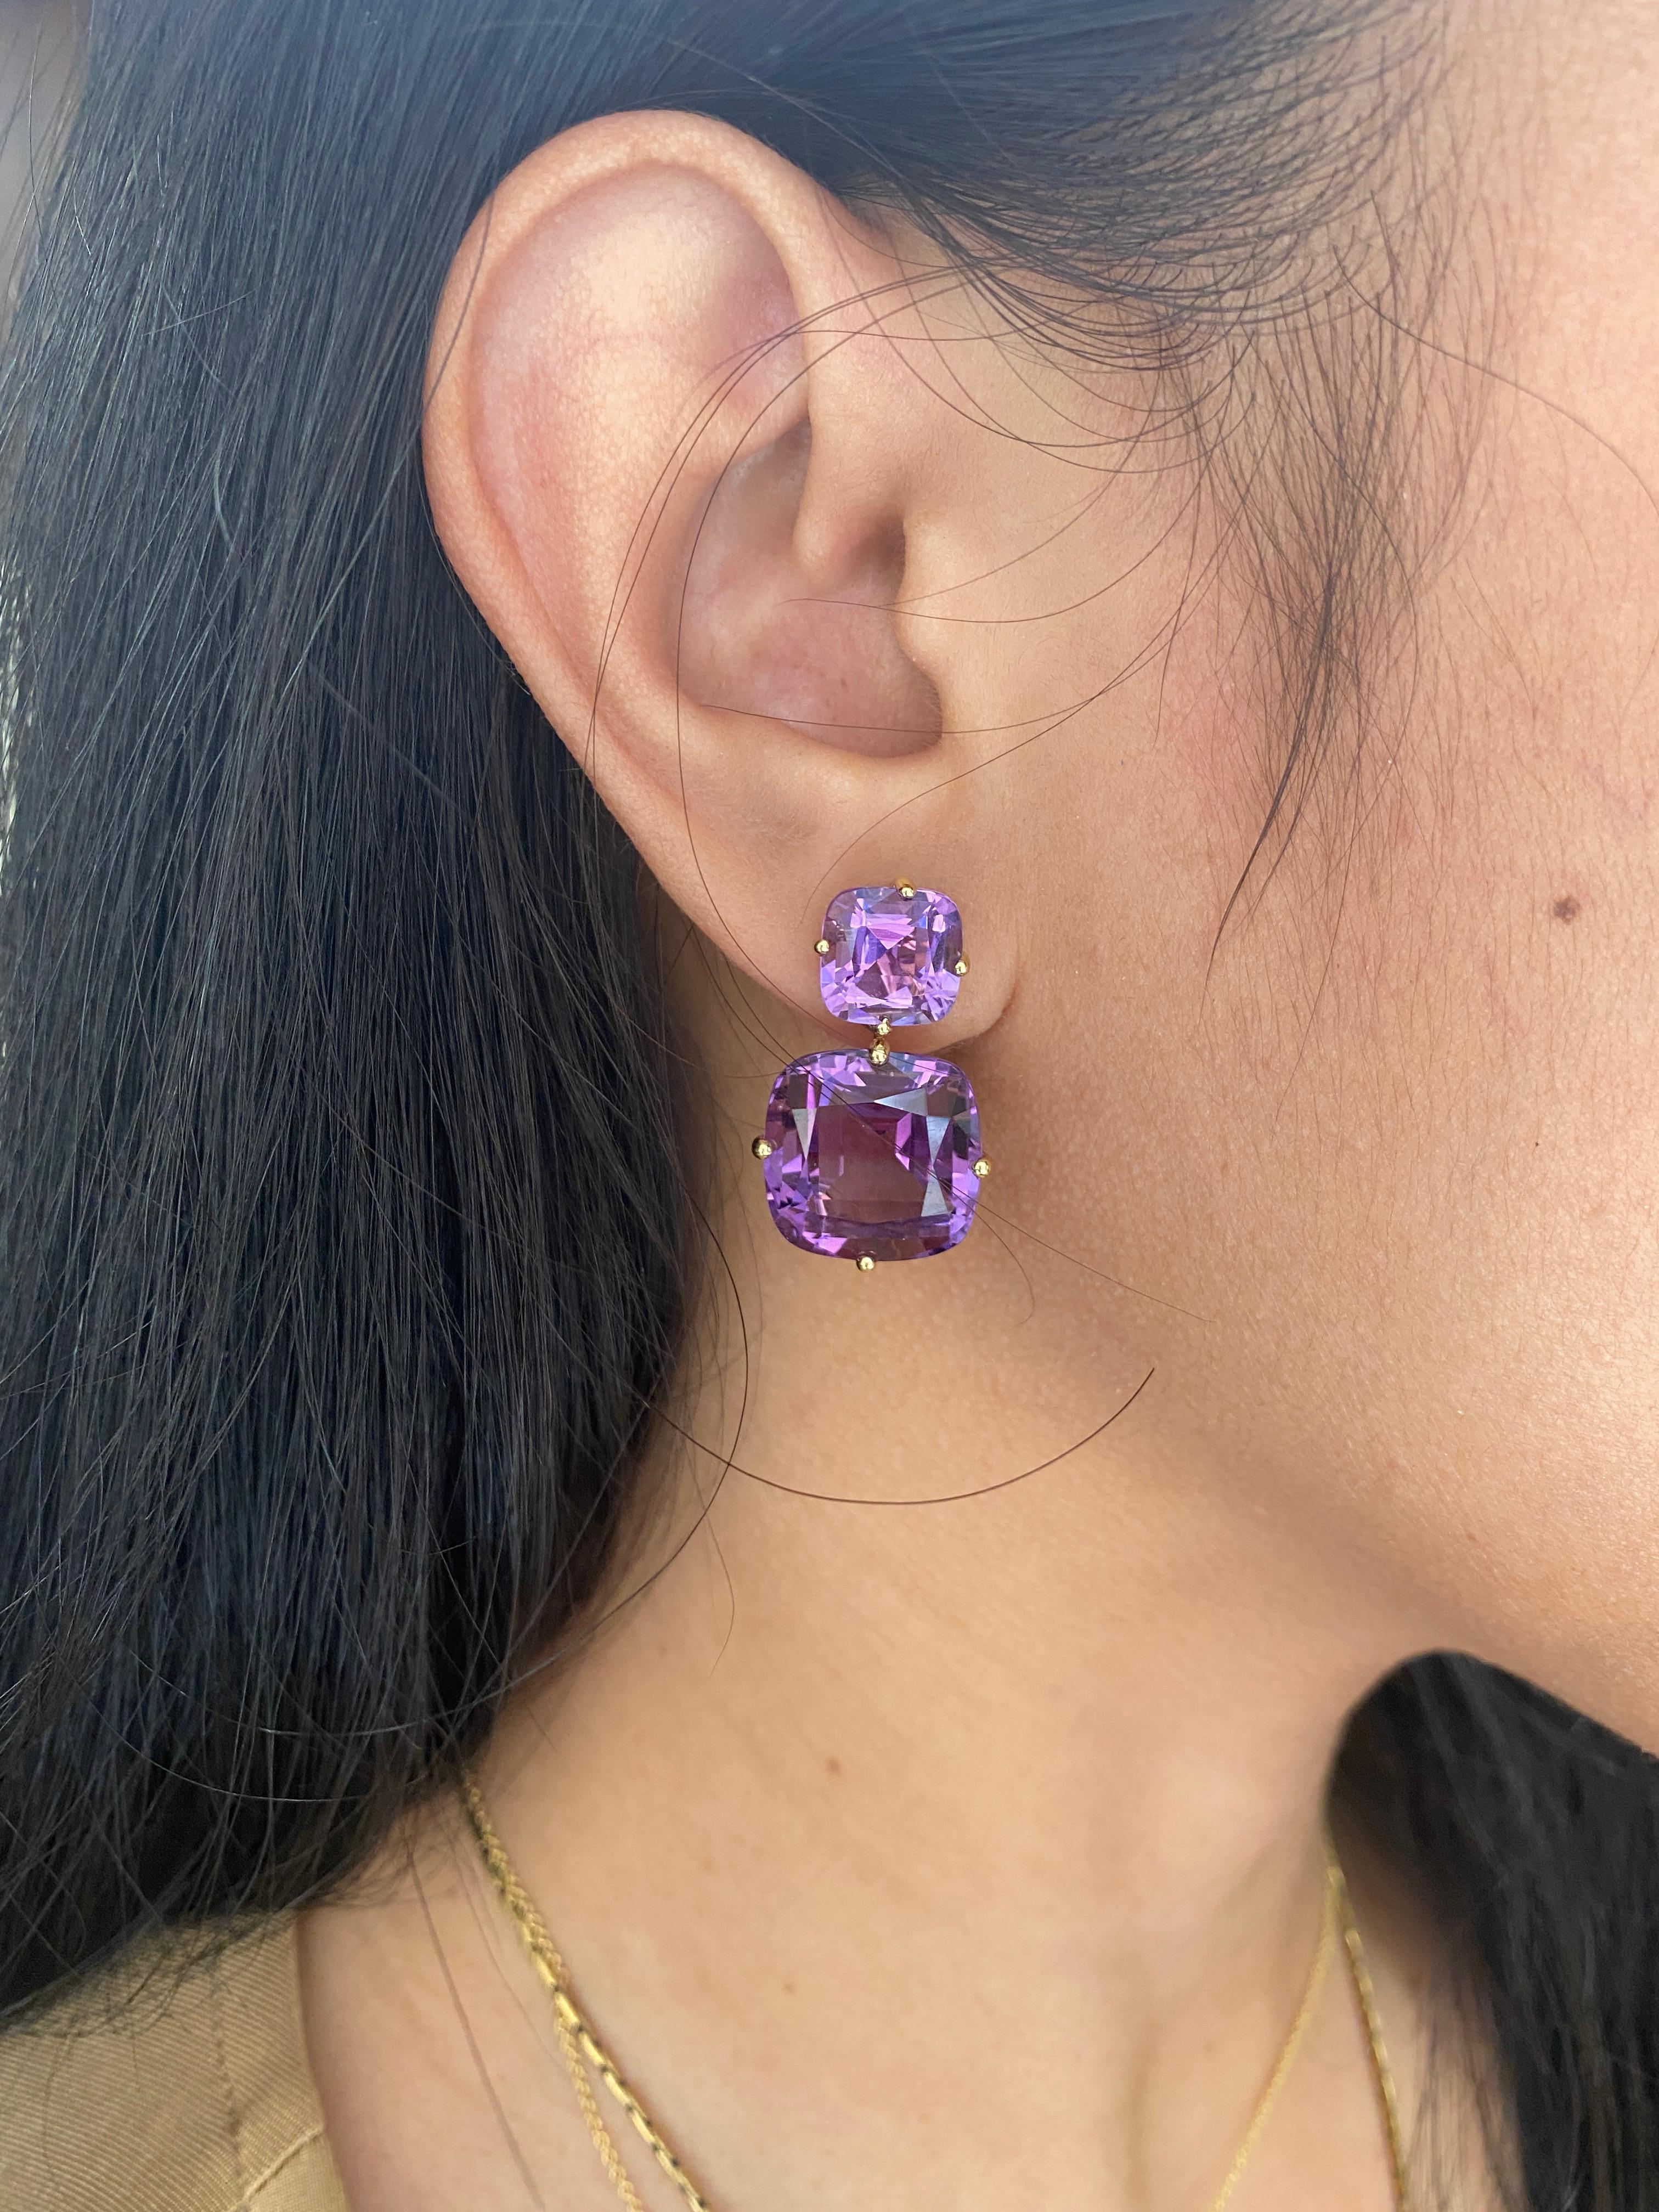 2 Tier Amethyst Cushion Earrings in 18k Yellow Gold, from 'Gossip' Collection. Like any good piece of Gossip, this collection carries a hint of shock value. They will have everyone in suspense about what Goshwara will do next.

* Gemstone size: 9 x